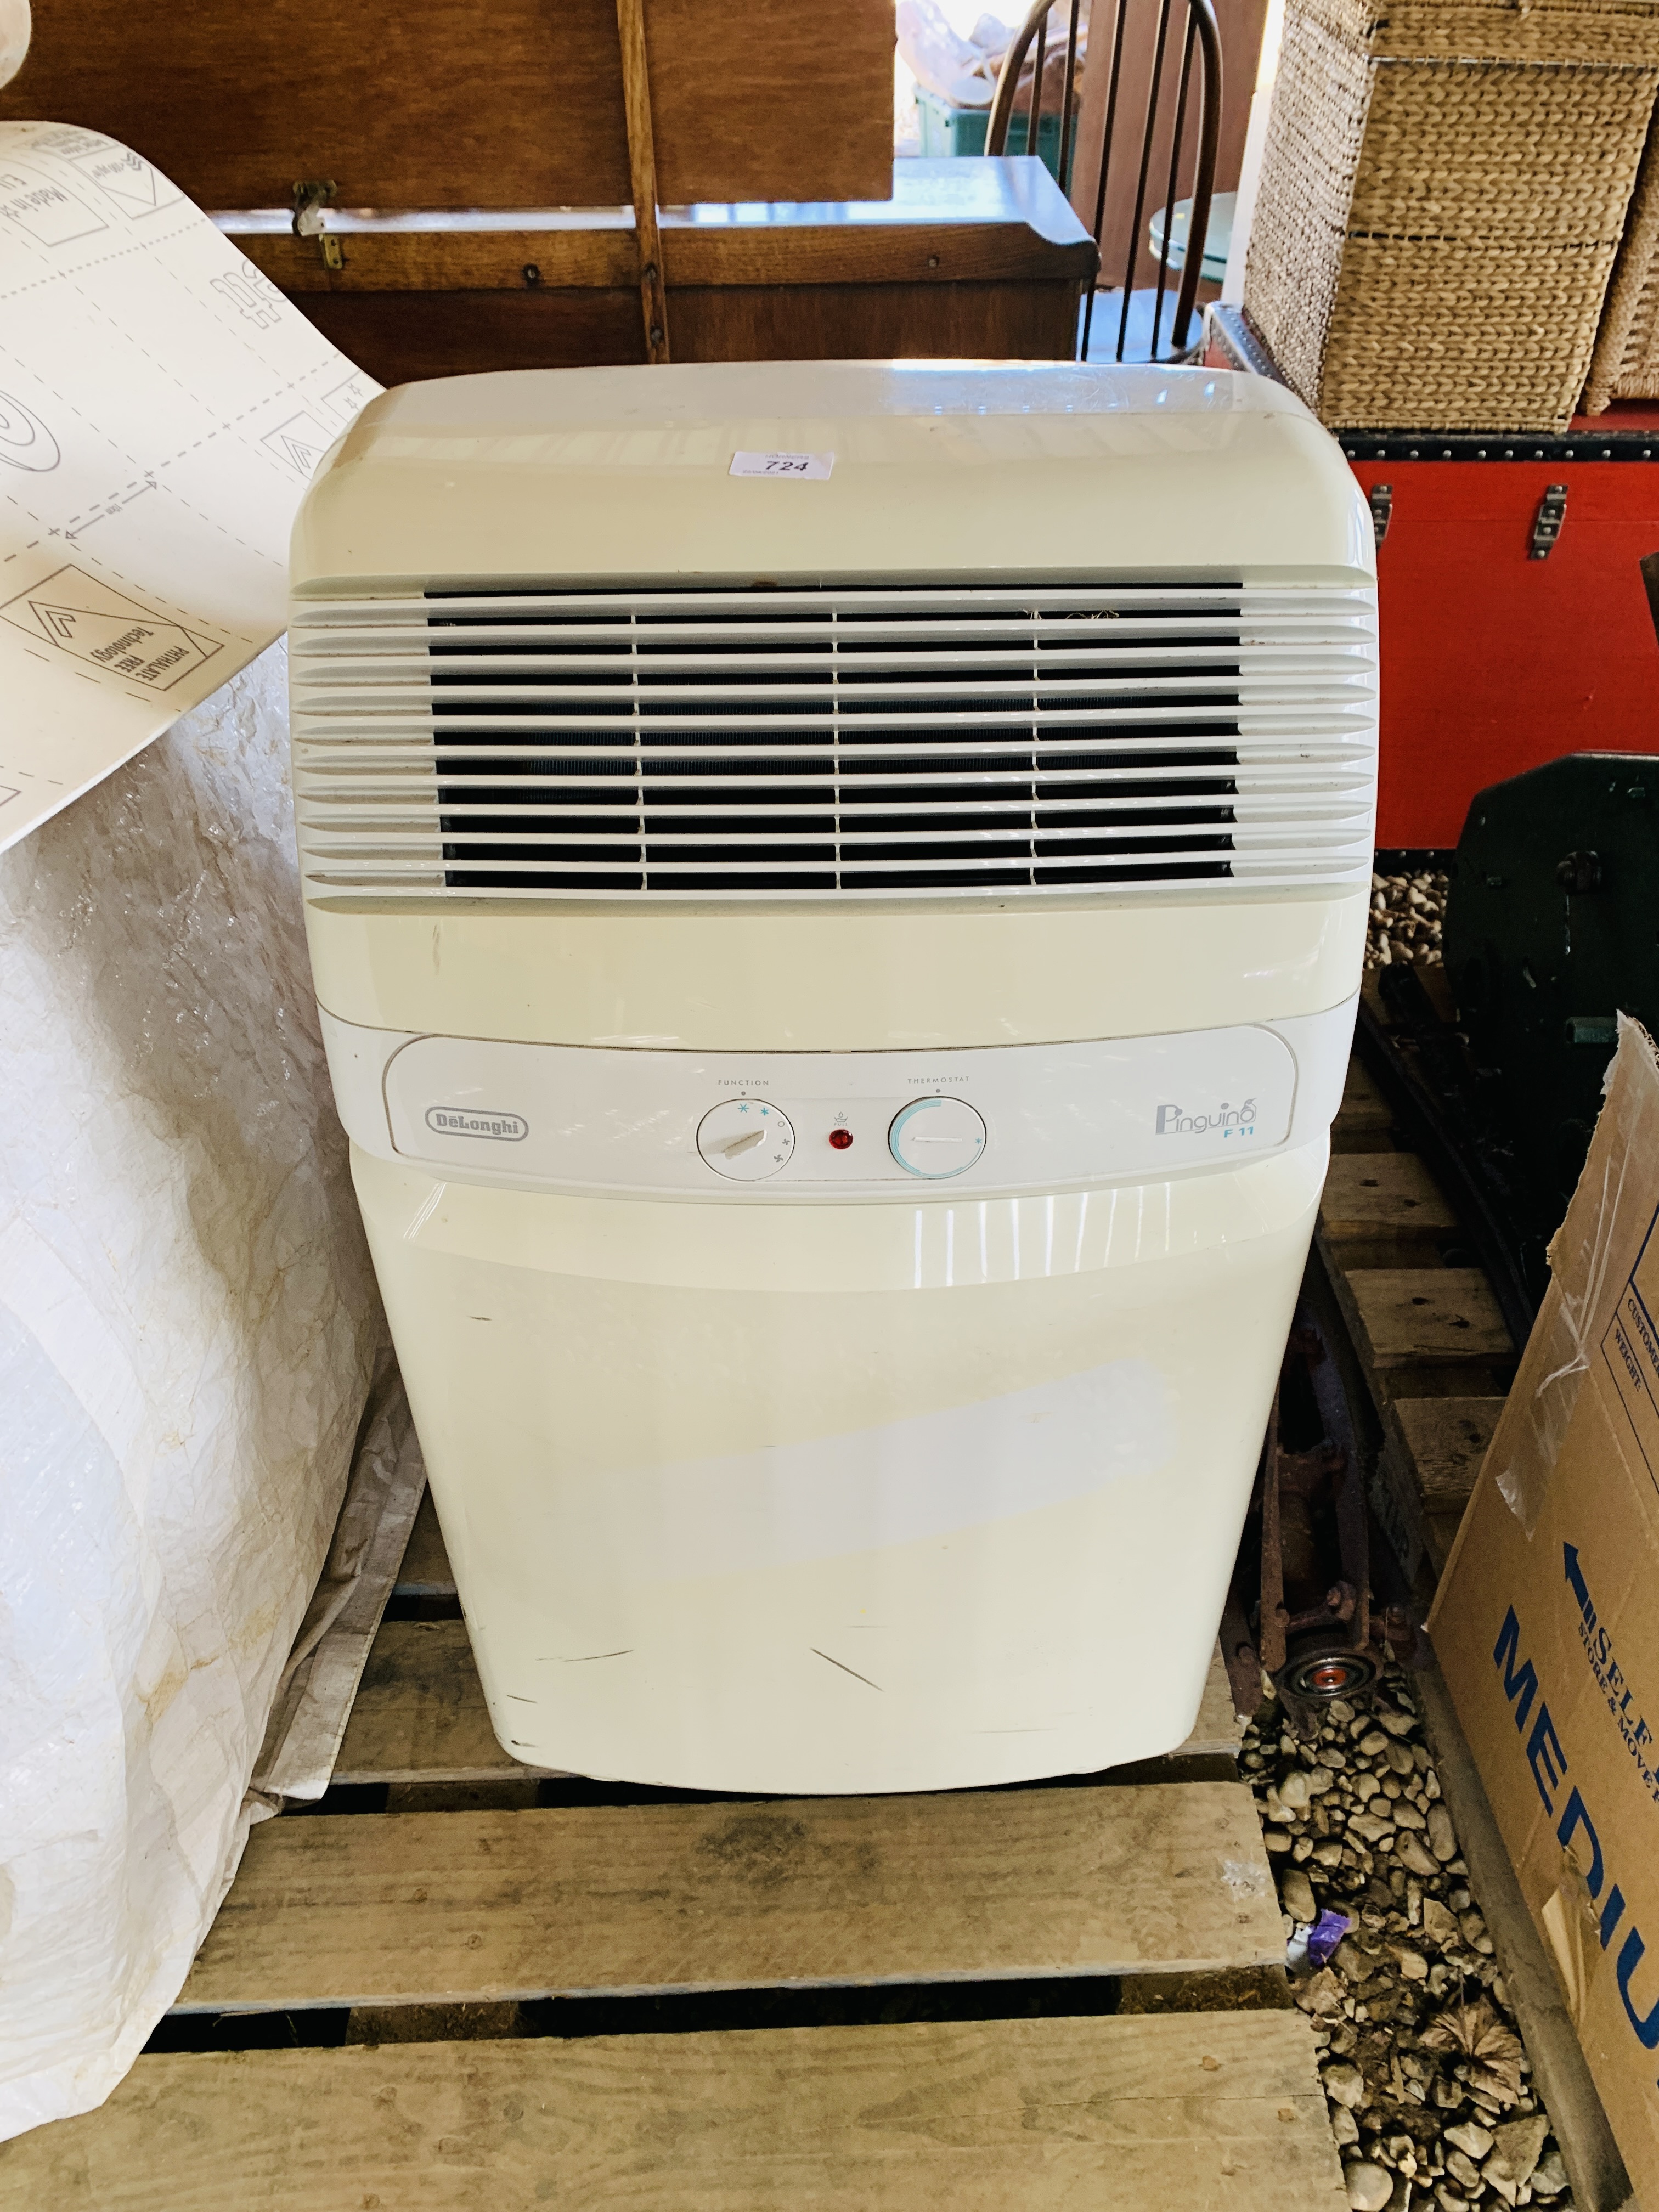 A DELONGHI PINGUINO F11 PORTABLE AIR CONDITIONING UNIT - SOLD AS SEEN